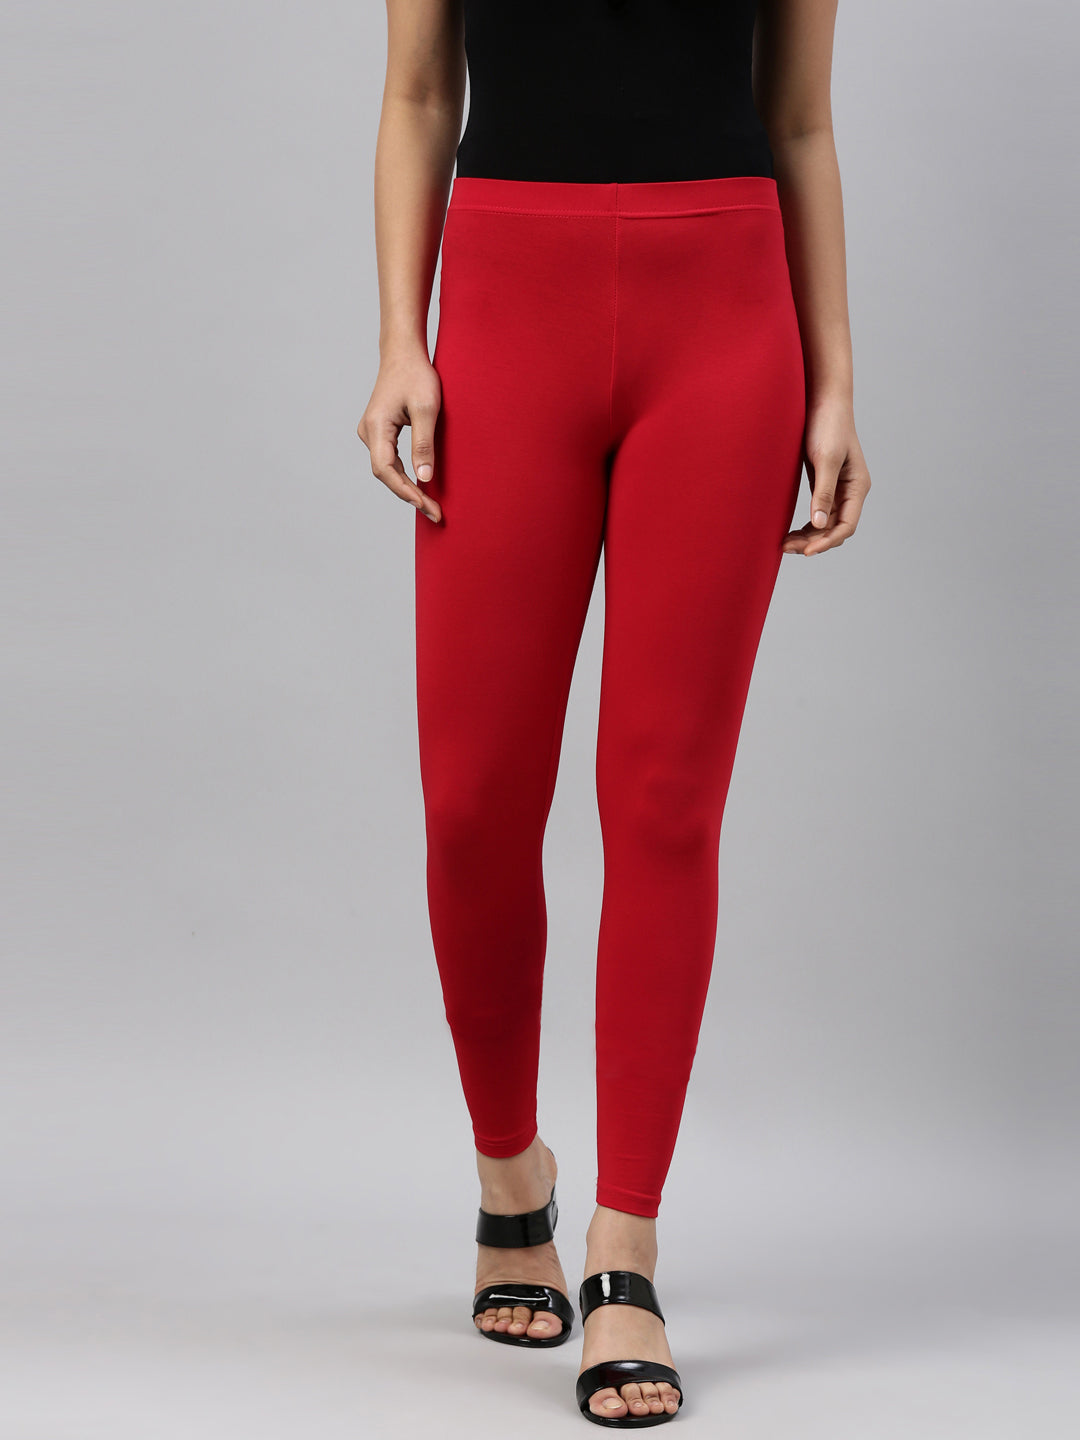 Buy Women's Solid Bright Red Slim Fit Ankle Length Leggings Online | Go  Colors